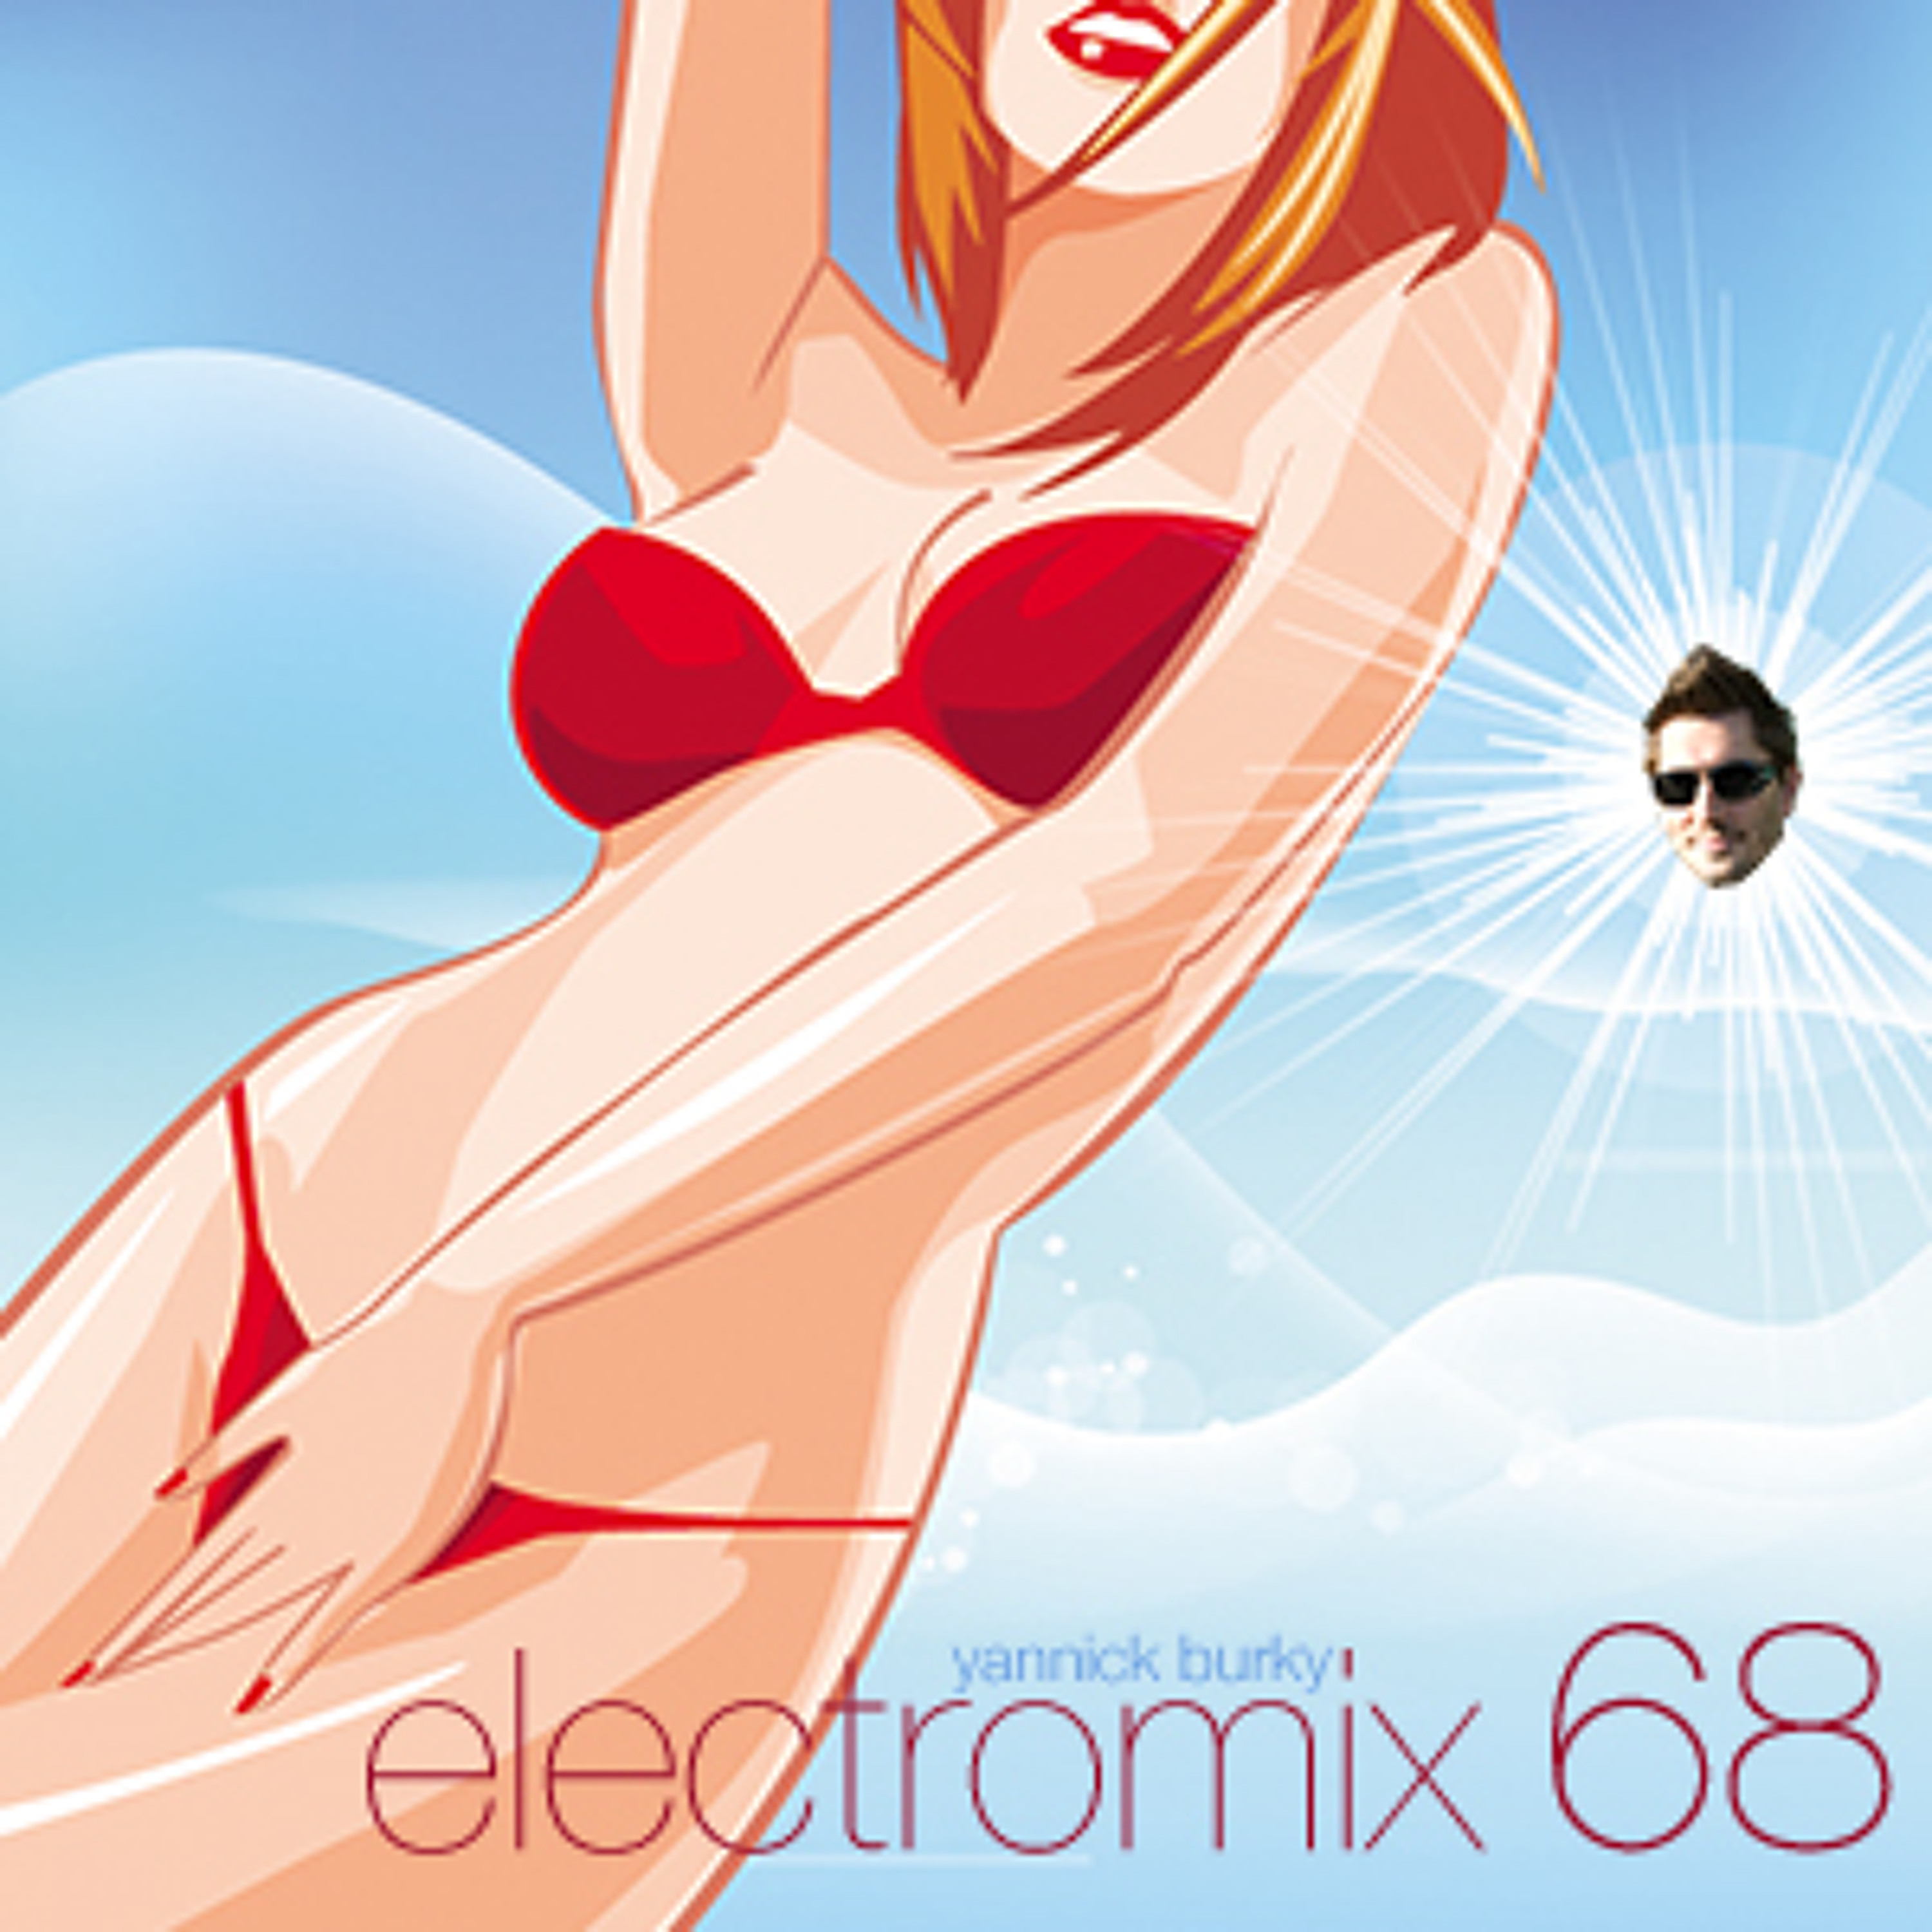 electromix 68 • House Music